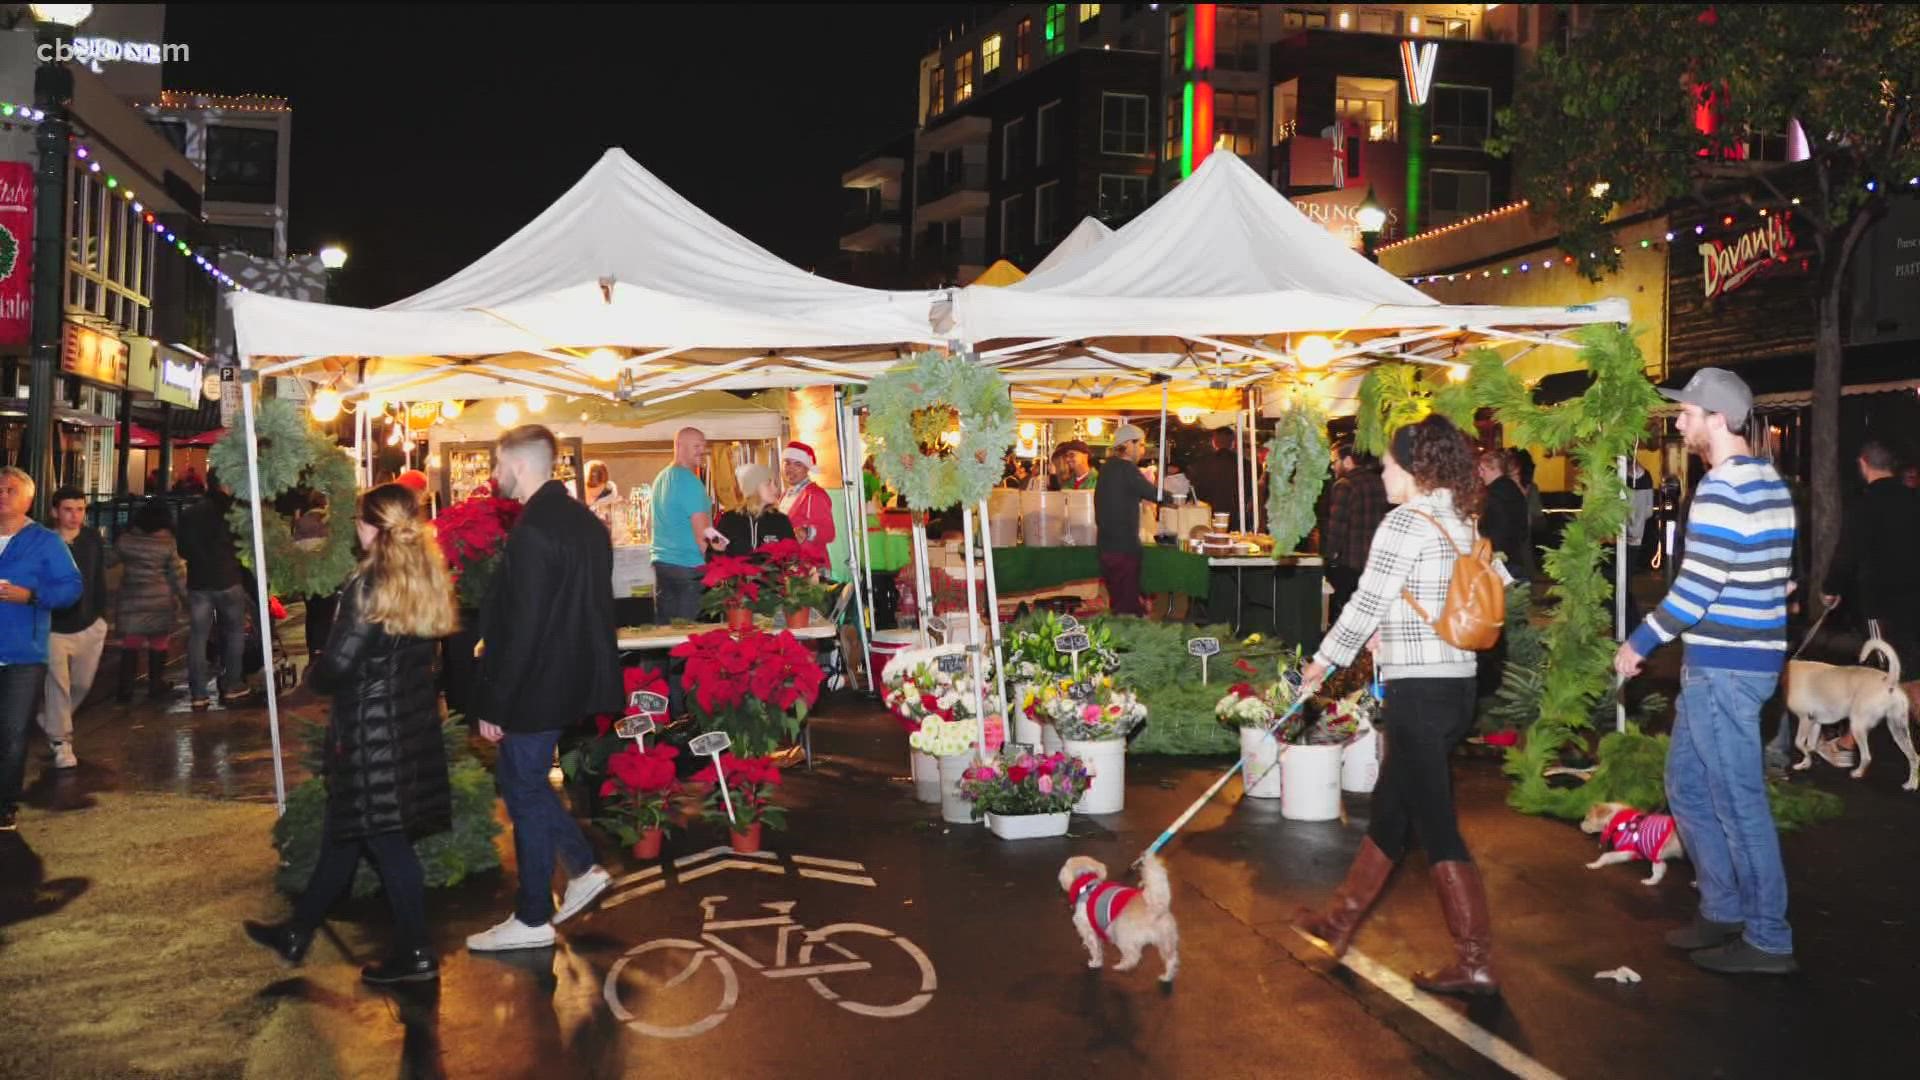 It’s beginning to look a lot like Christmas in Little Italy and even more so on Saturday when they have their tree lighting and Christmas village.